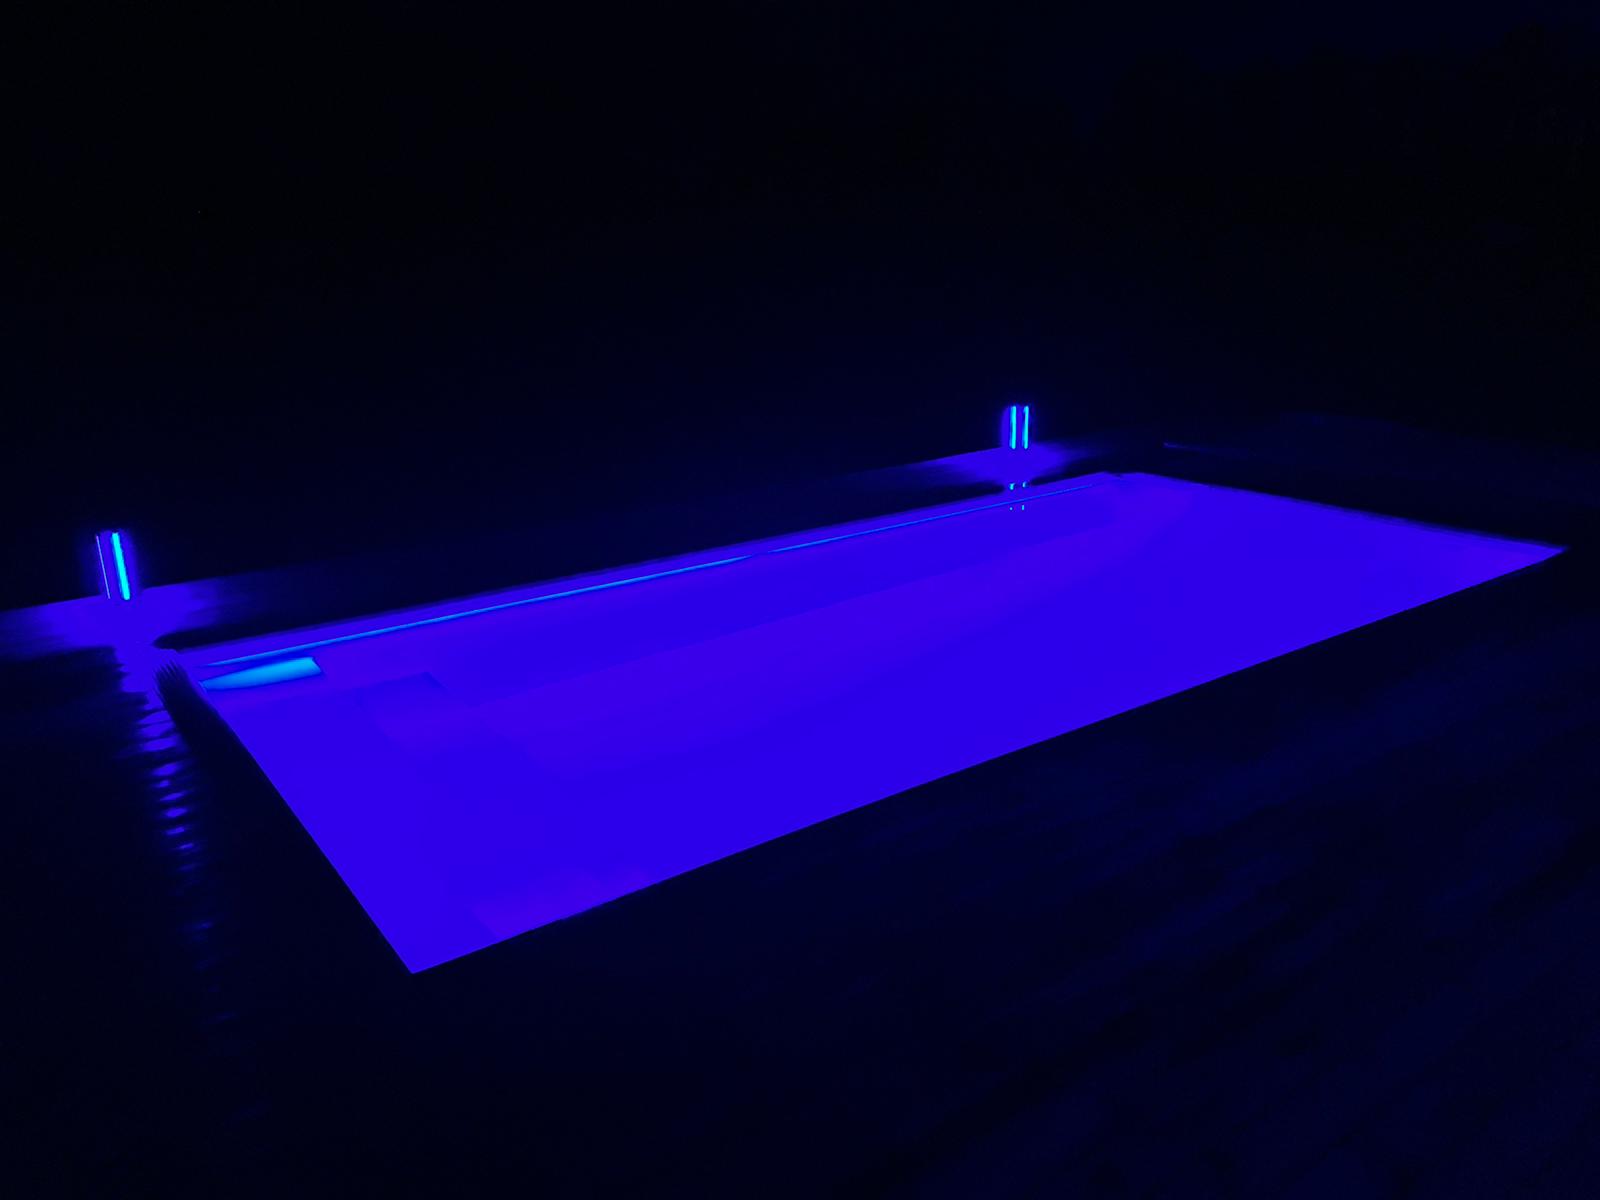 others do not have such a pool light